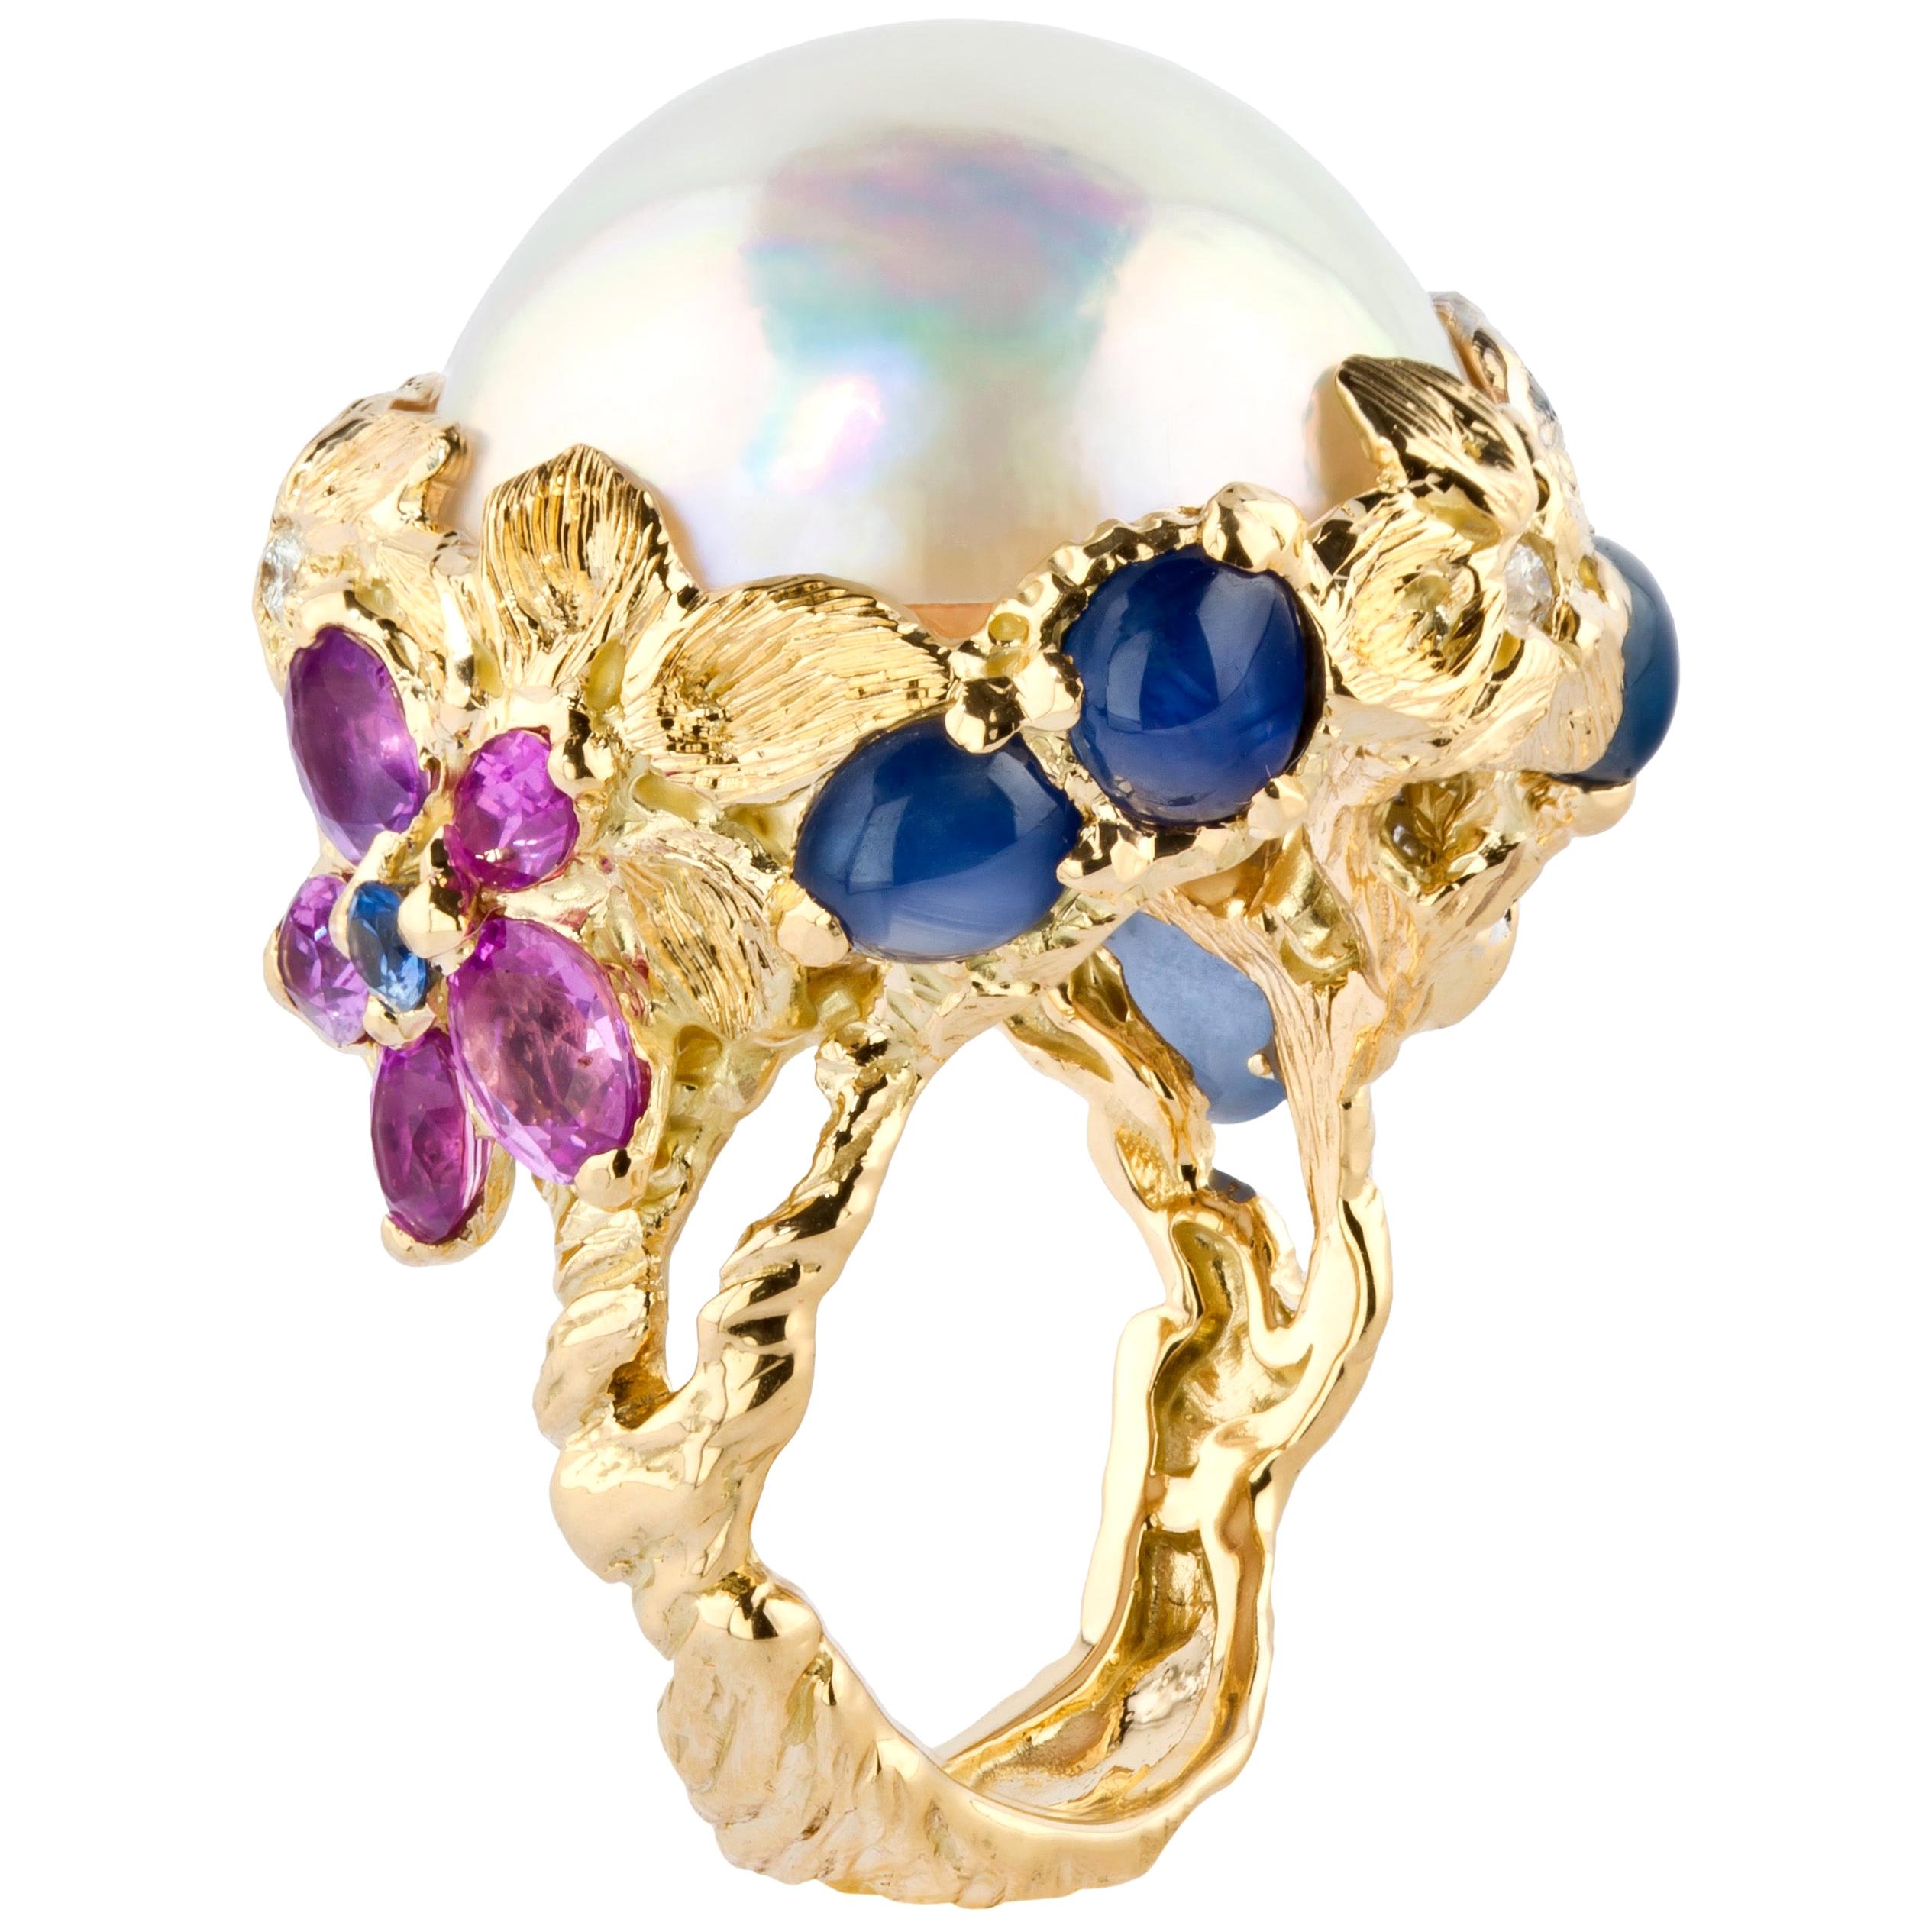 Moiseikin 18 Karat Gold Mabe Pearl and Sapphire Ring